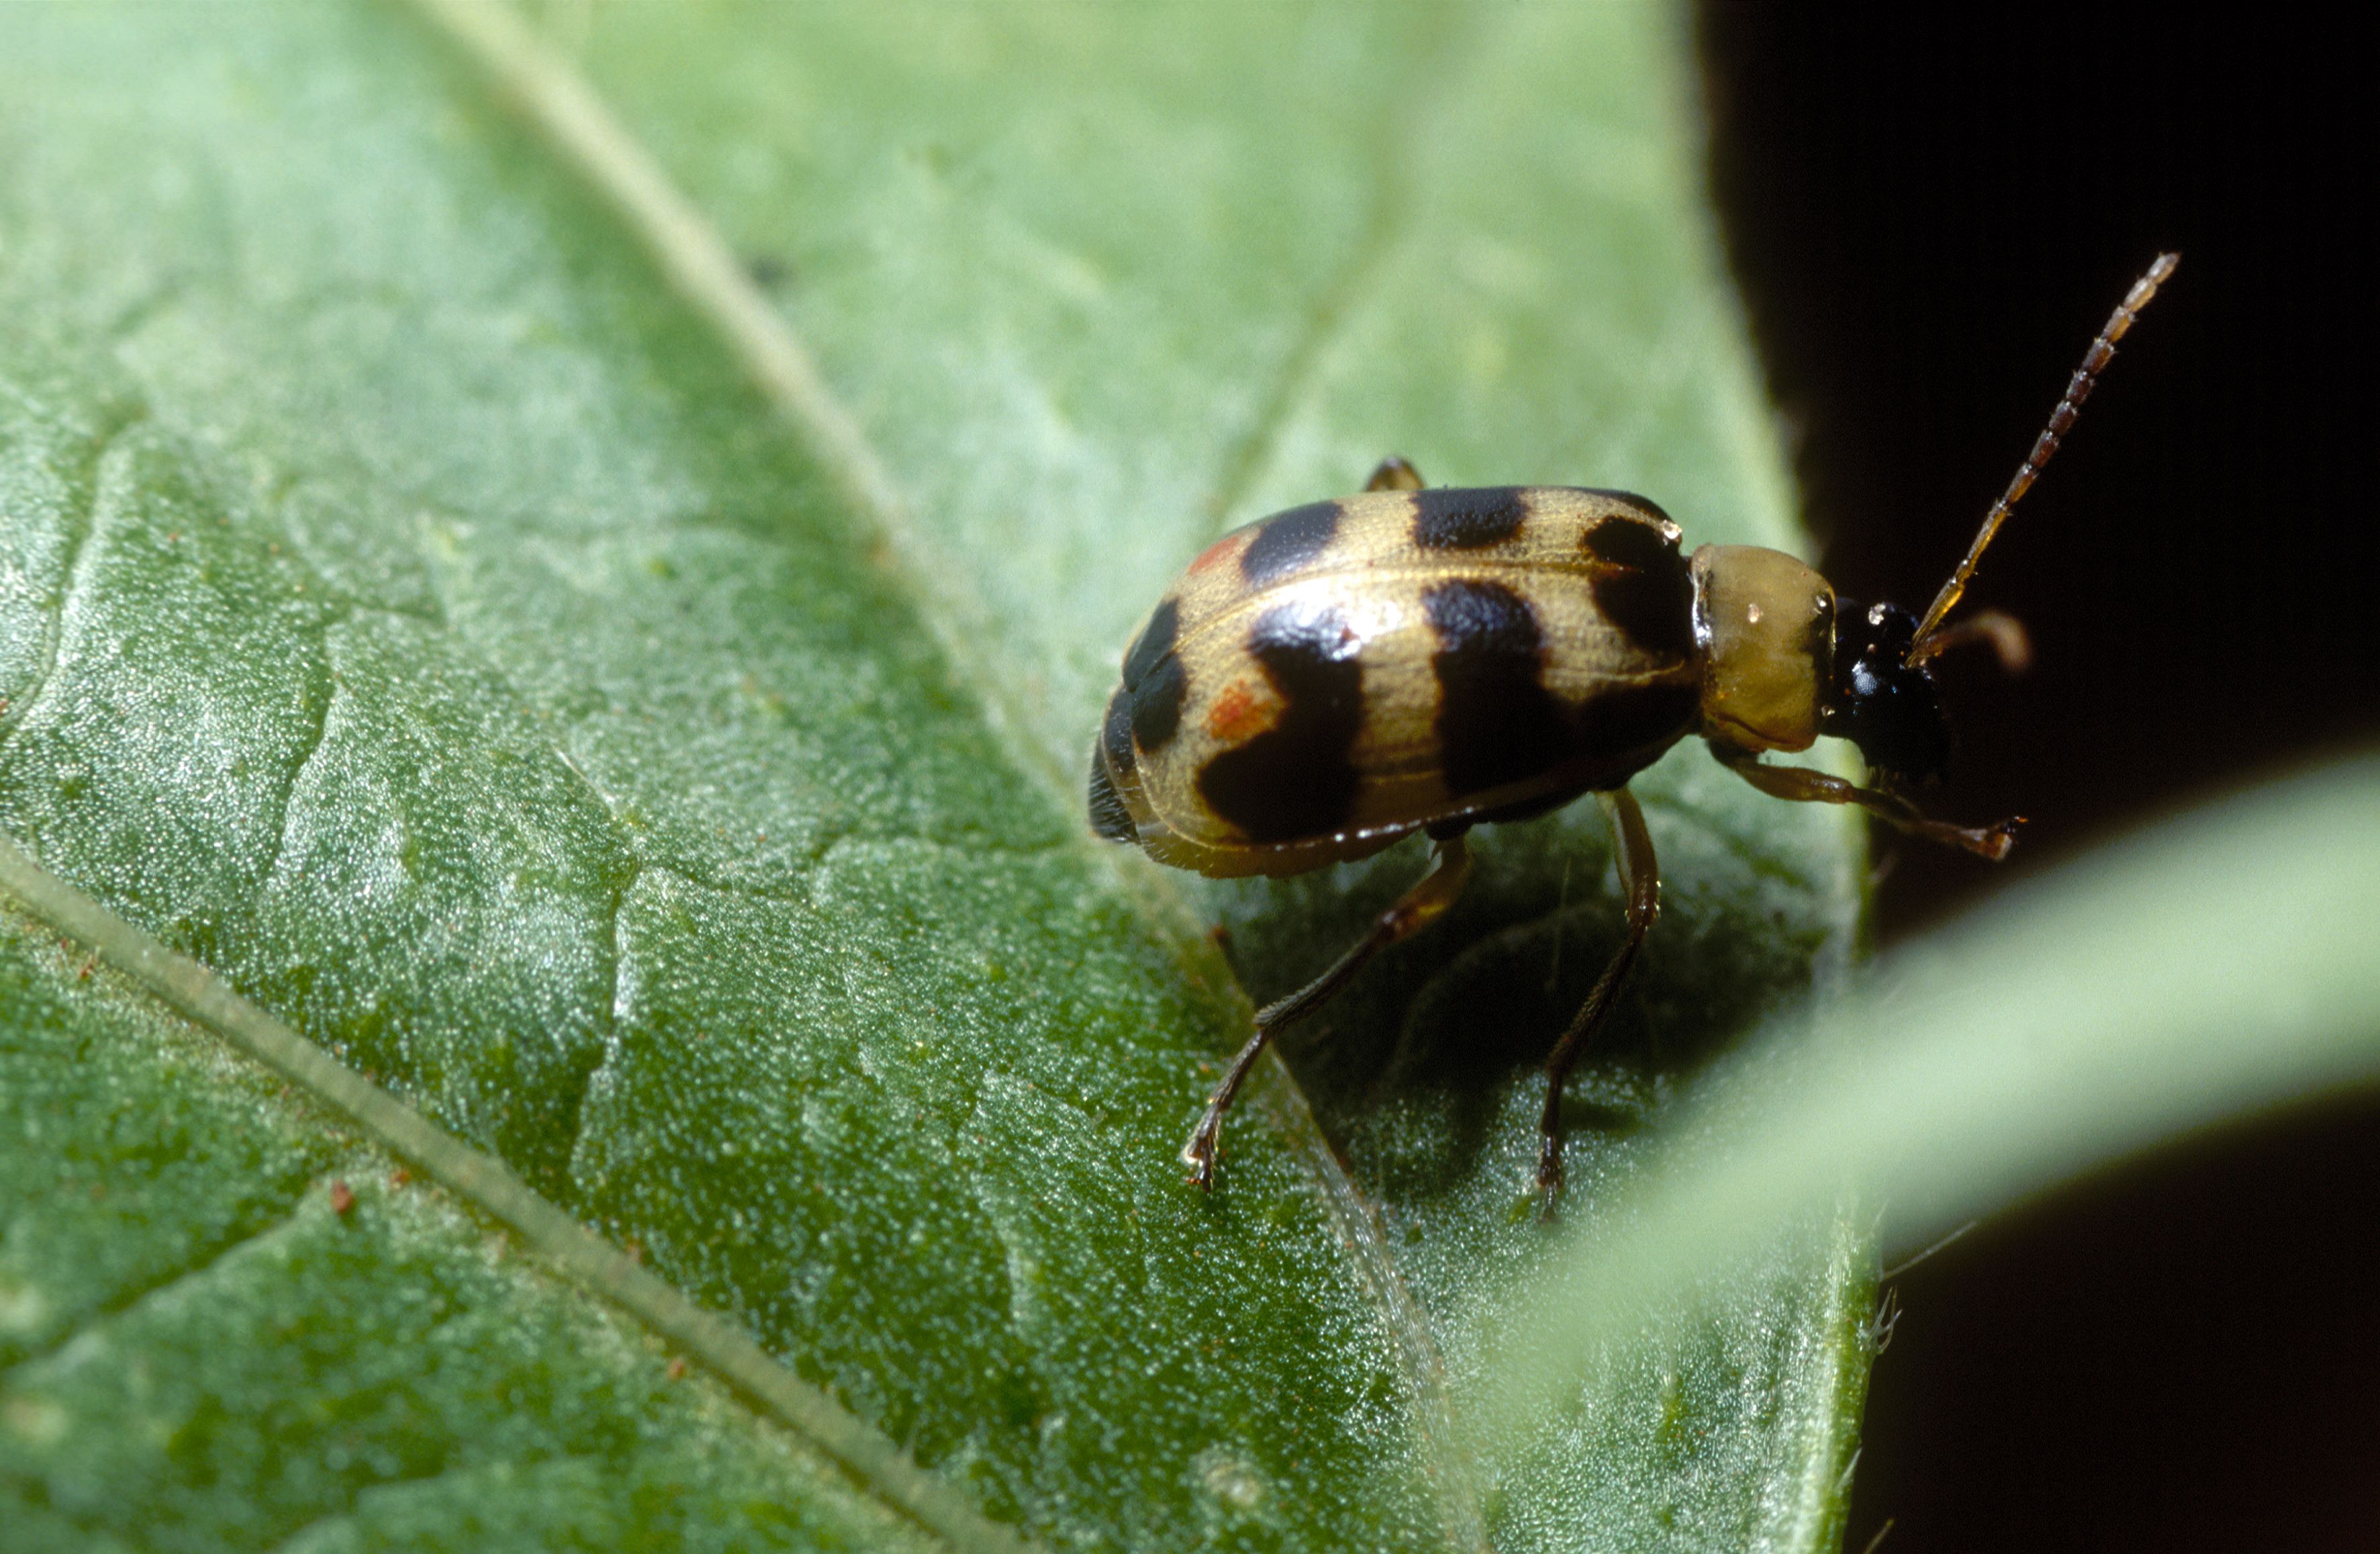 An agronomic picture of soybean insects and diseases.